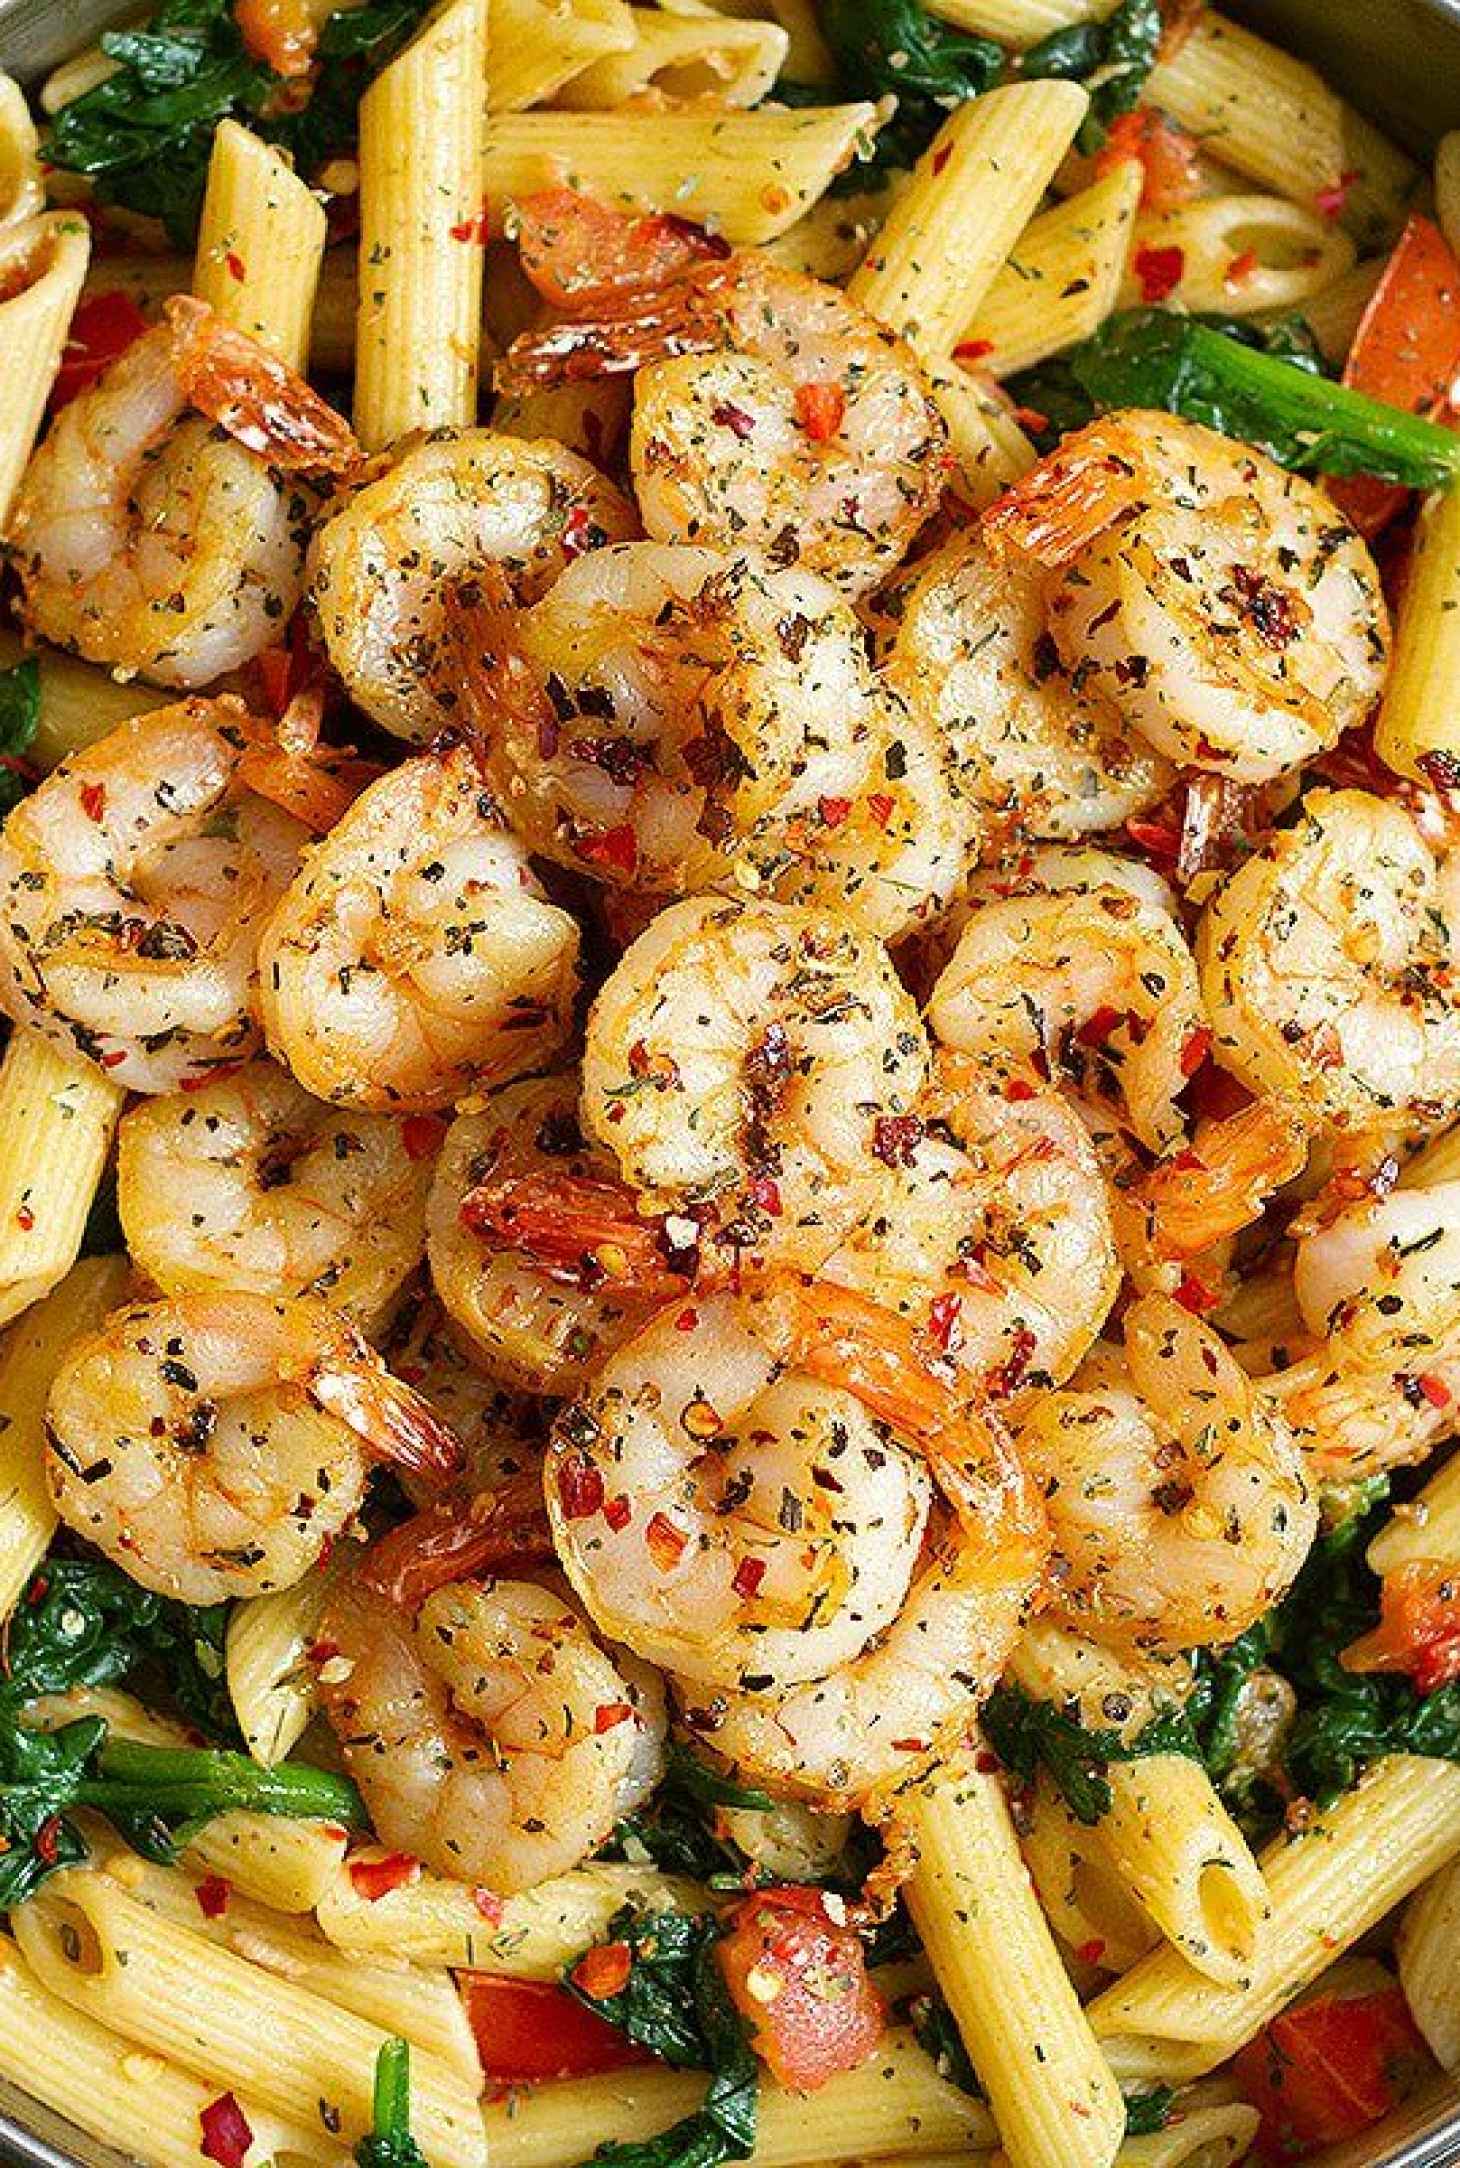 Tomato Spinach Shrimp Pasta - #recipe by #eatwell101 - https://www.eatwell101.com/shrimp-pasta-recipe-with-tomato-and-spinach